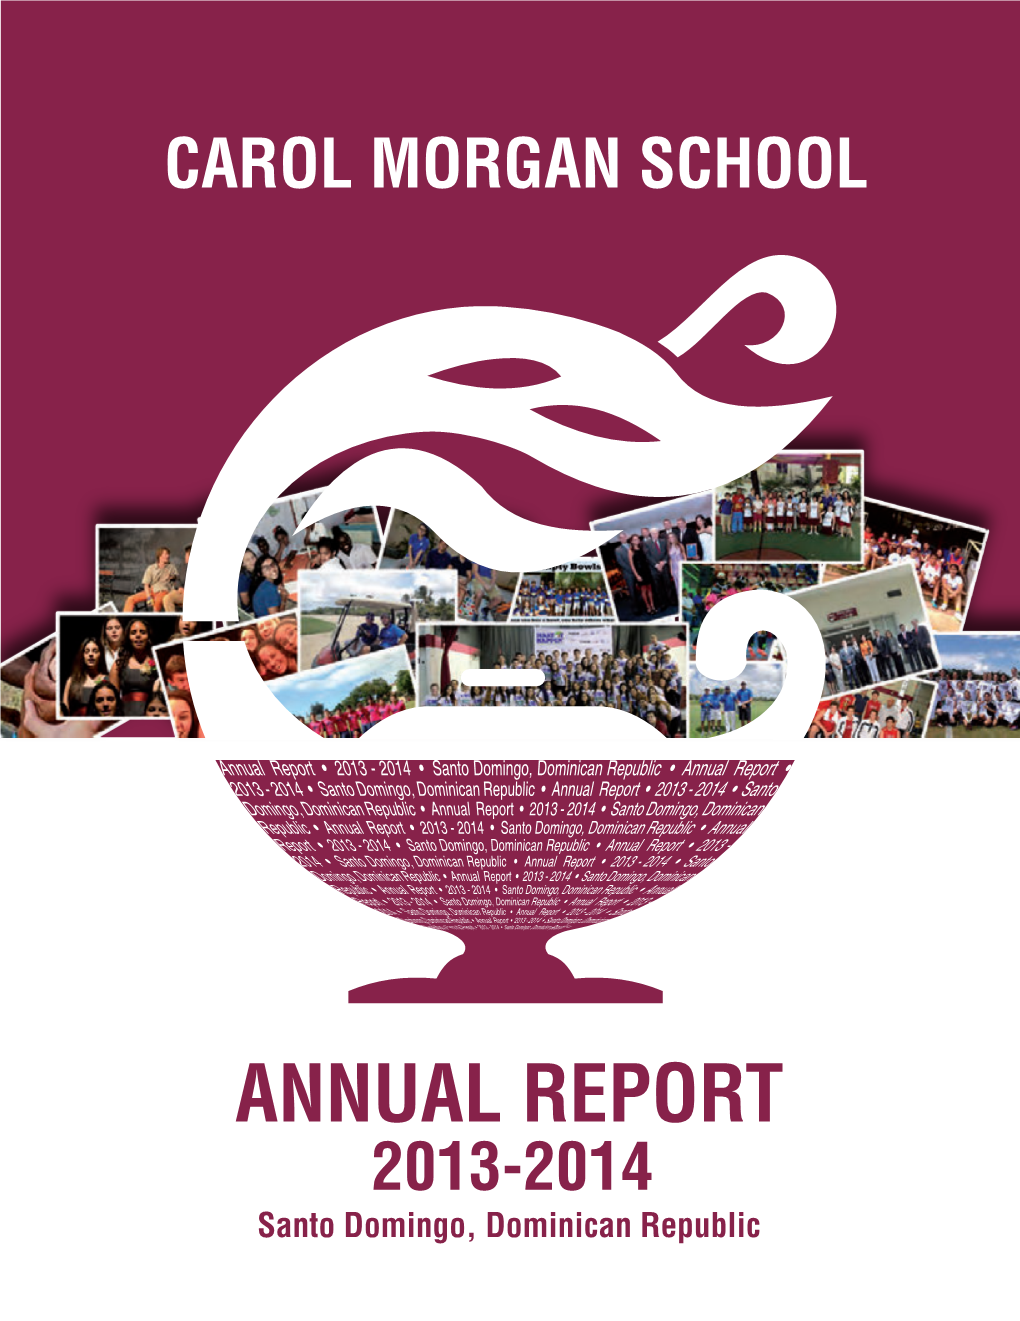 CMS Annual Report 2013-2014